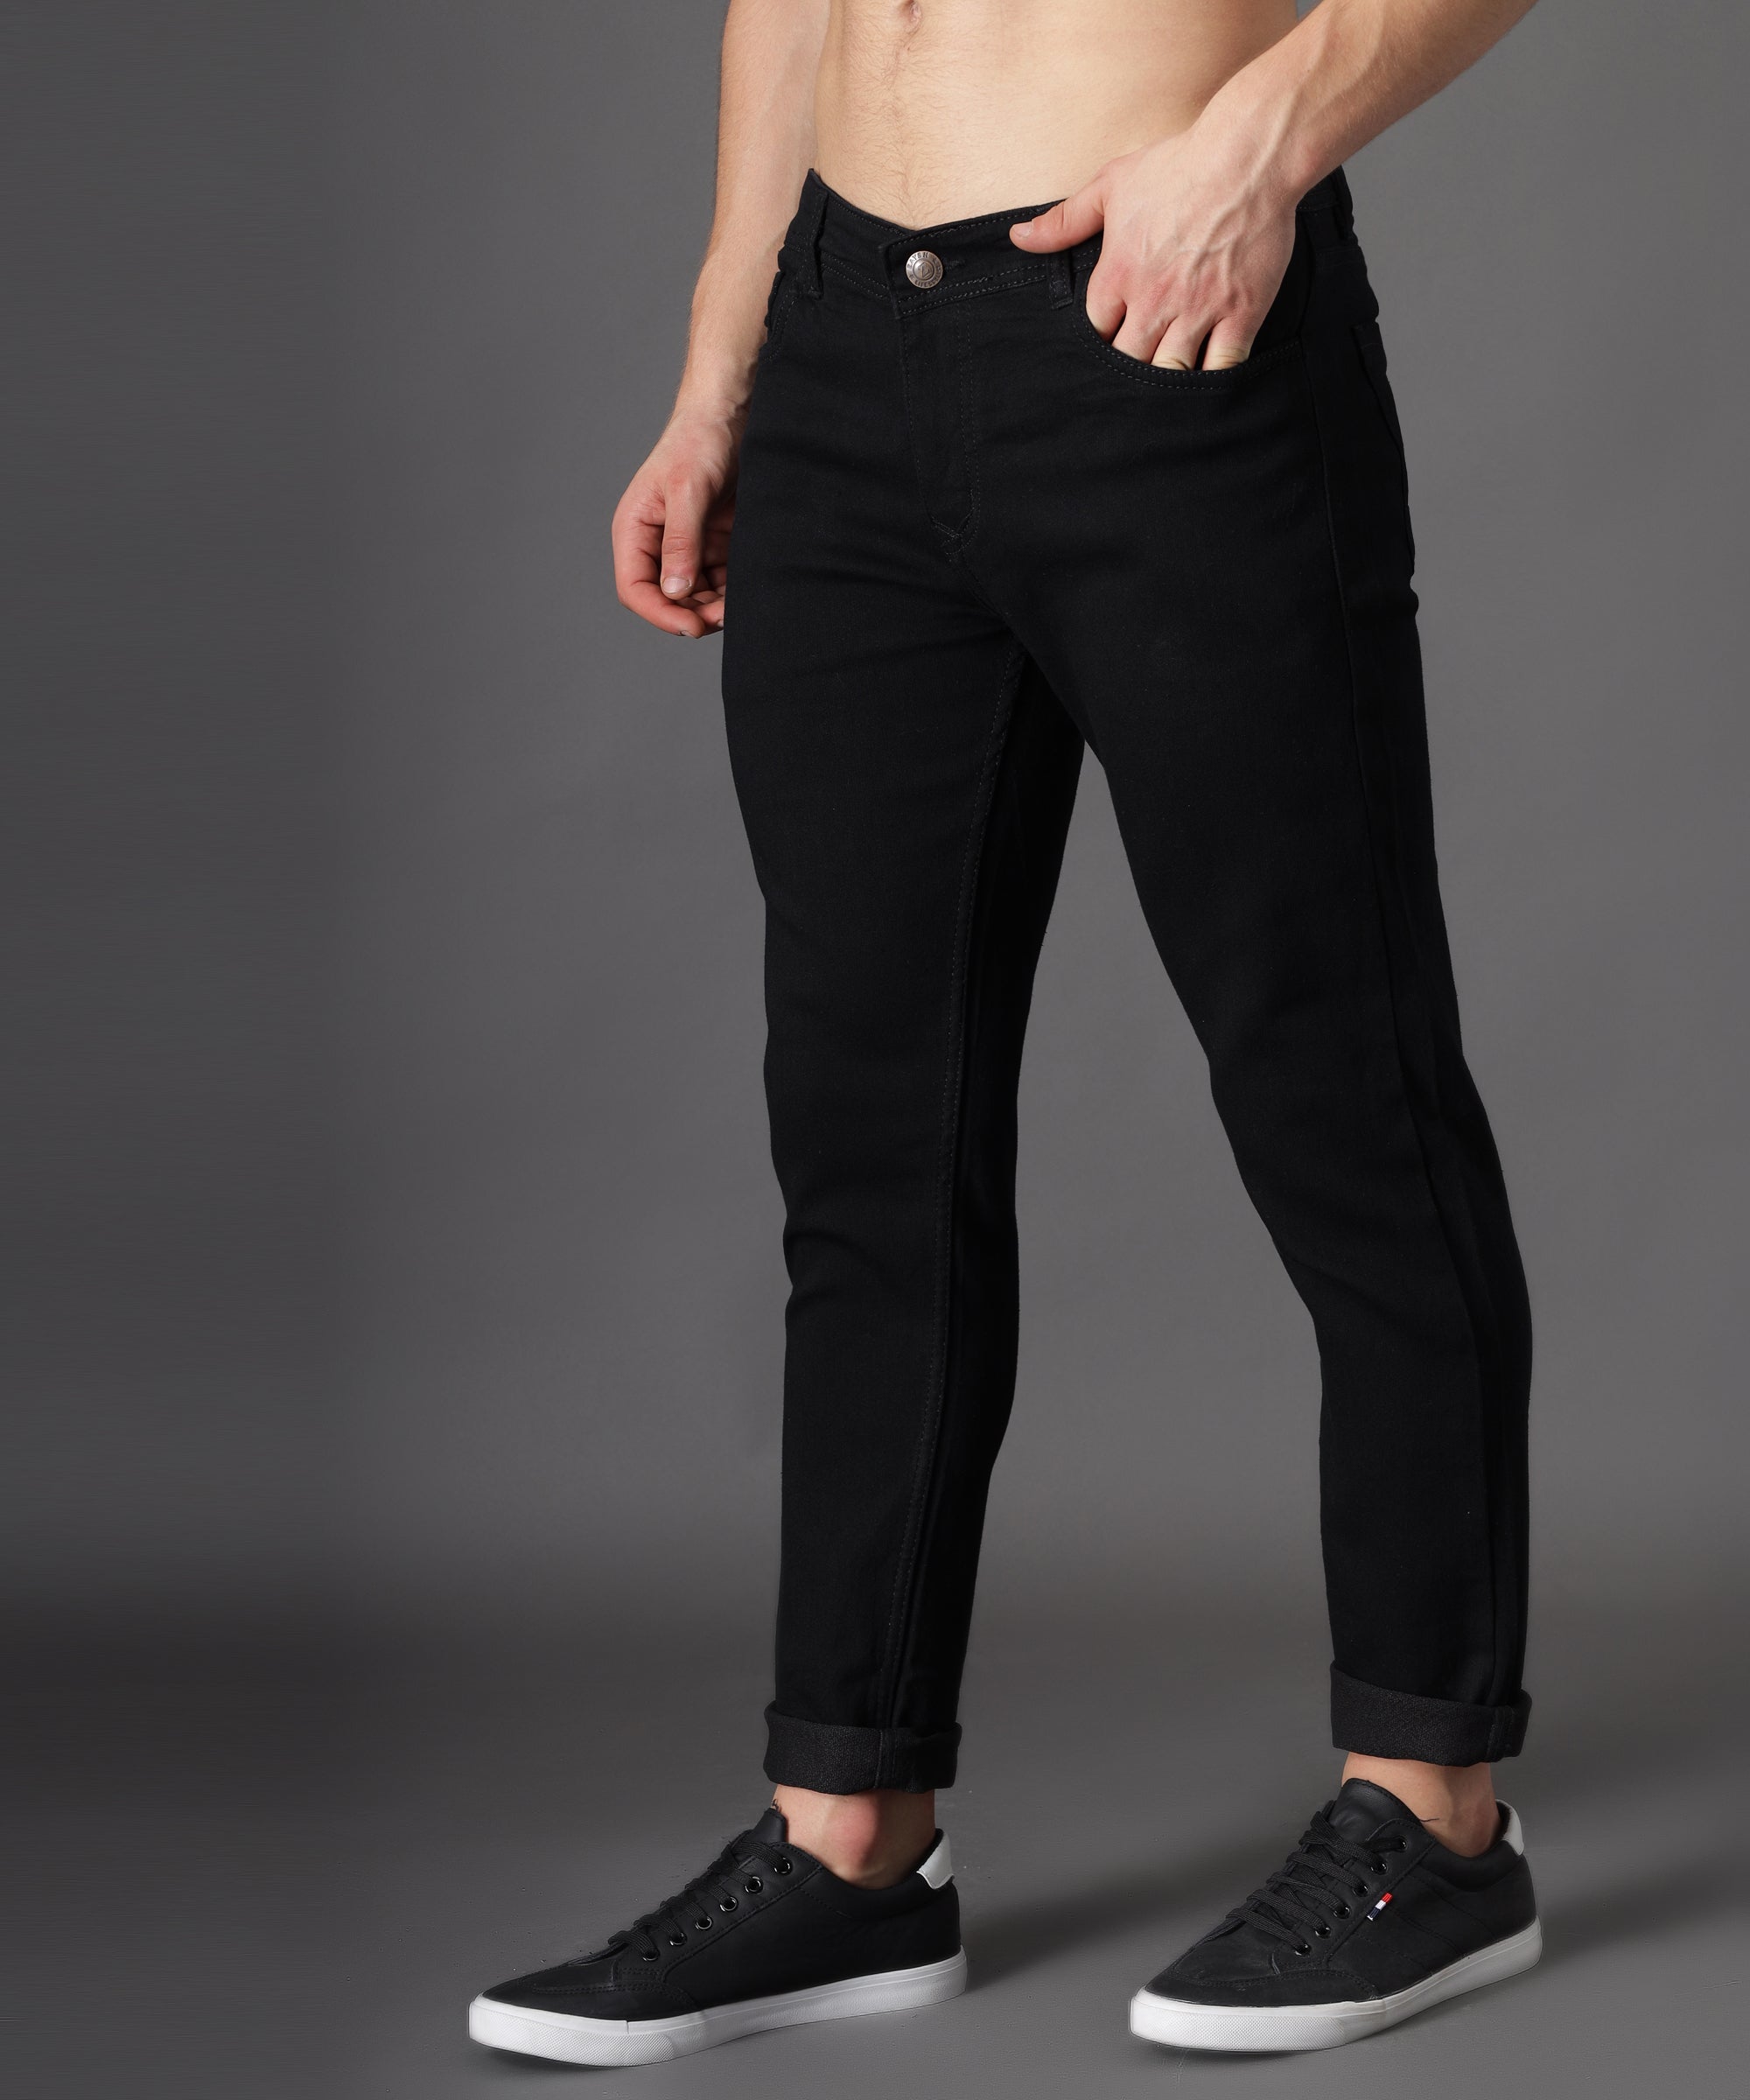 The Roadster Lifestyle Co. Women Charcoal Black Preppy College Cool Utility  Jeans - Price History